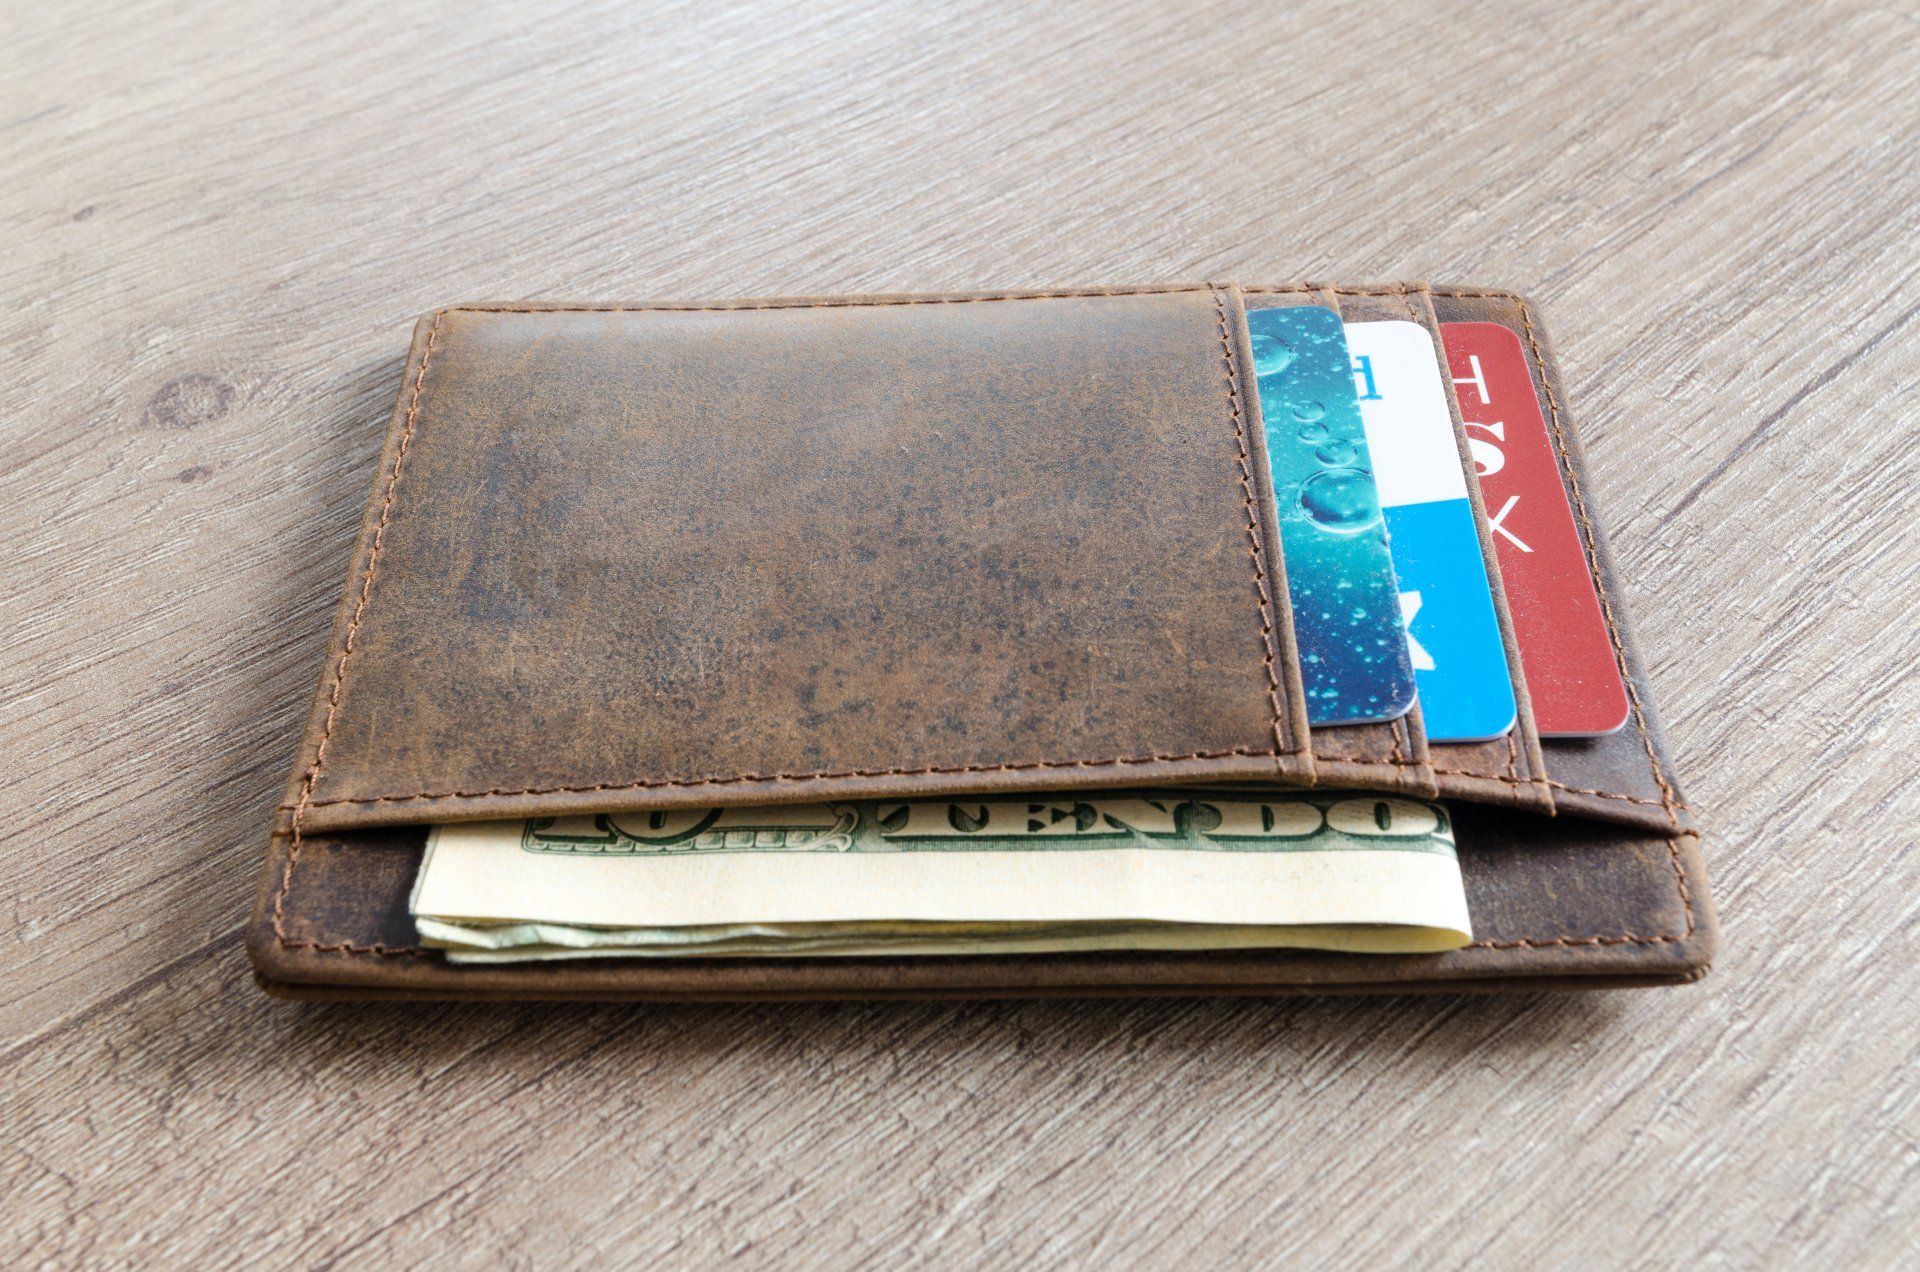 An image a faded, brown leather wallet with visible dollar bills and credit cards in the pockets.